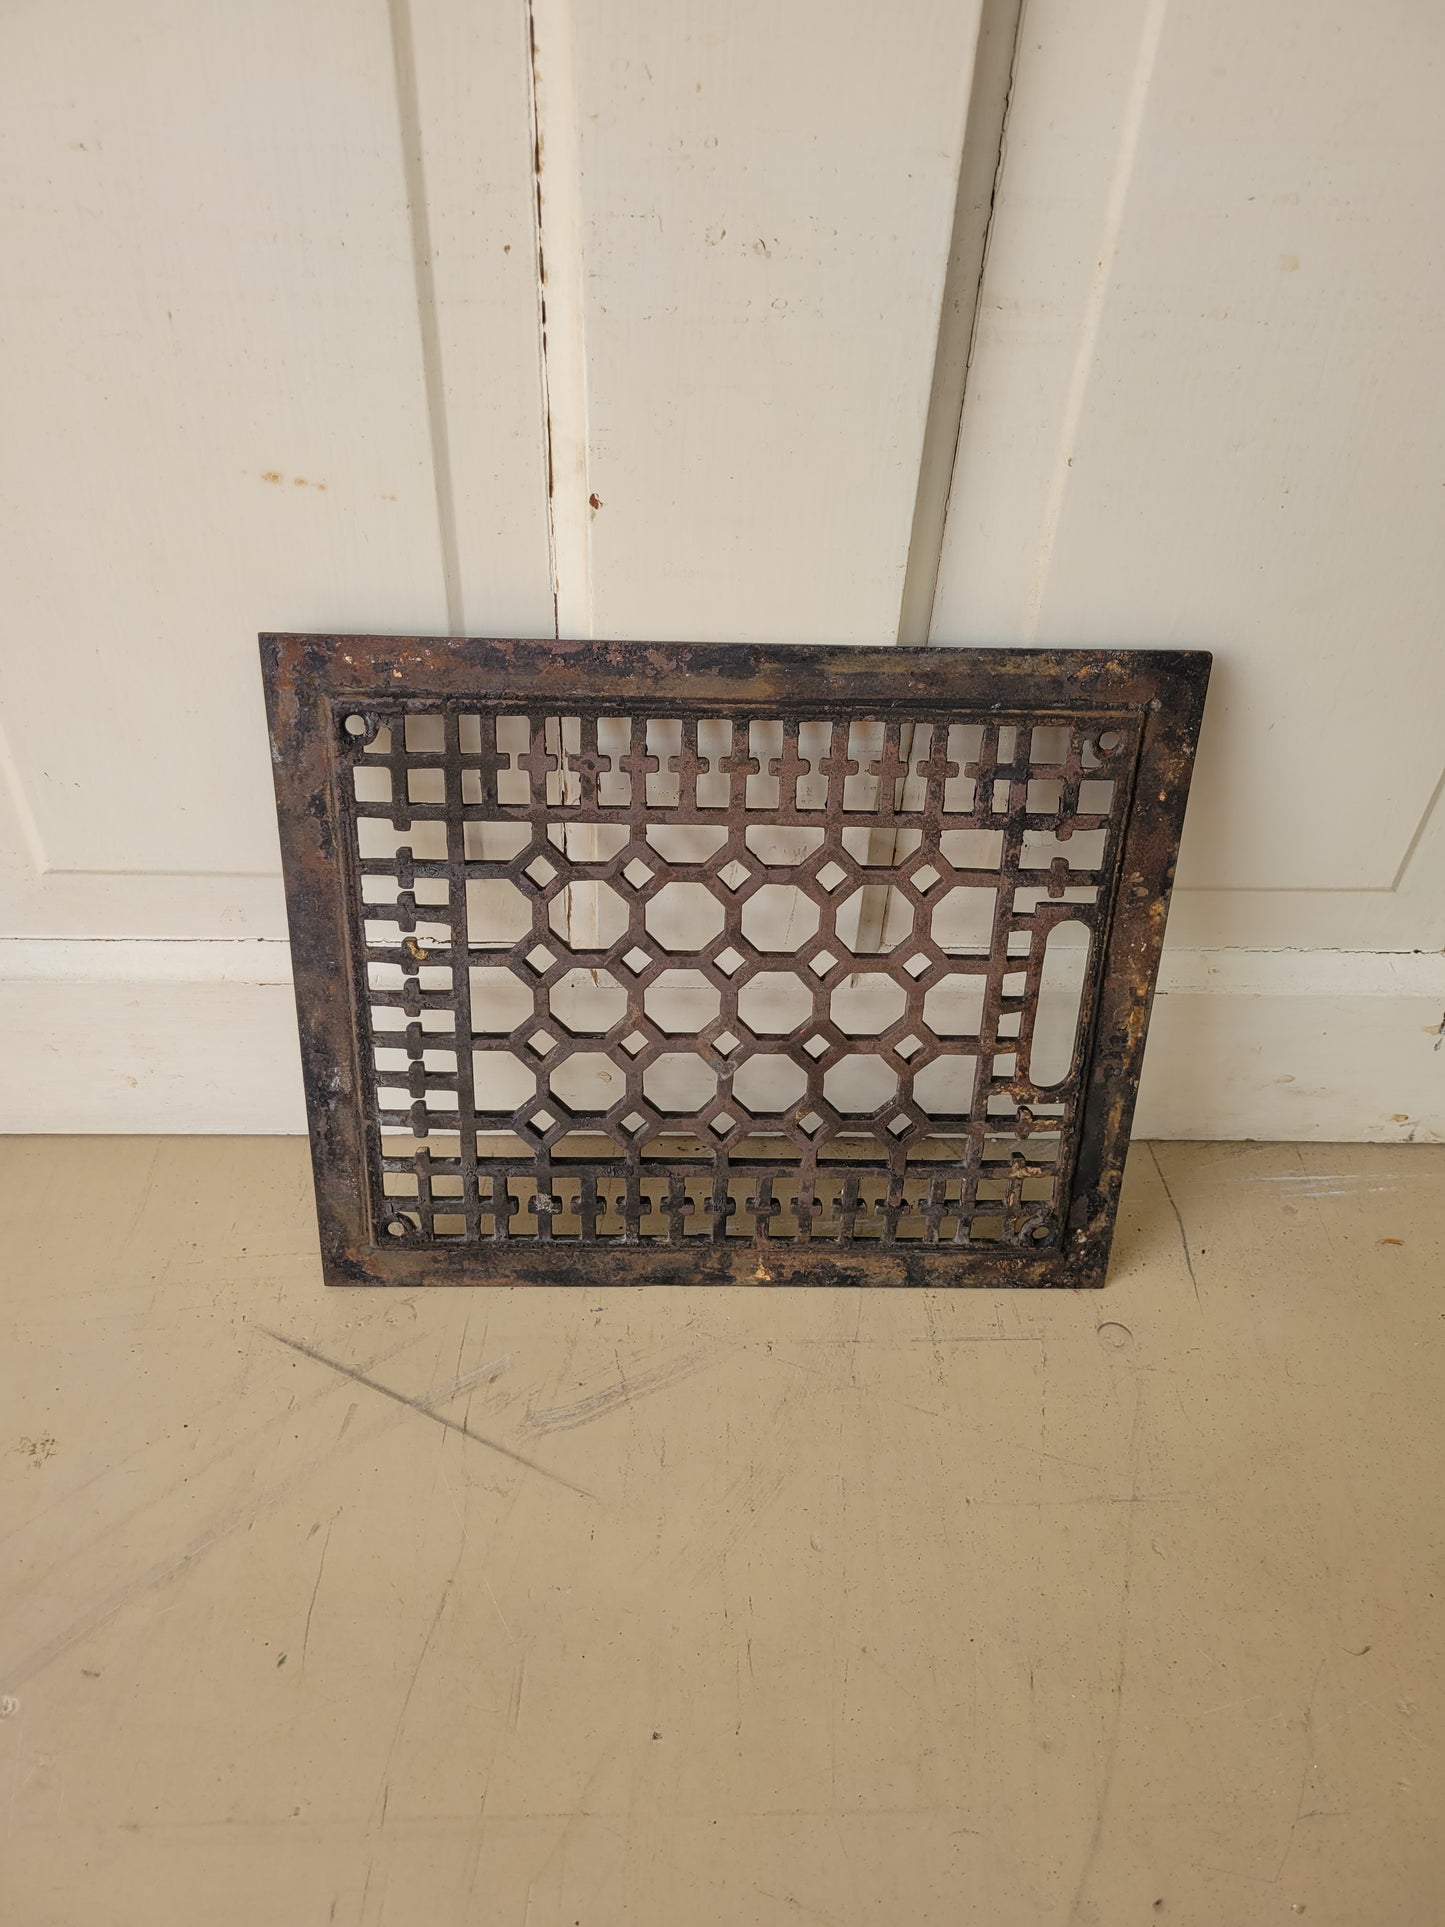 12 x 10 Fancy Antique Register Cover, Antique Cast Iron Floor Vent Cover with Dampers, #032103